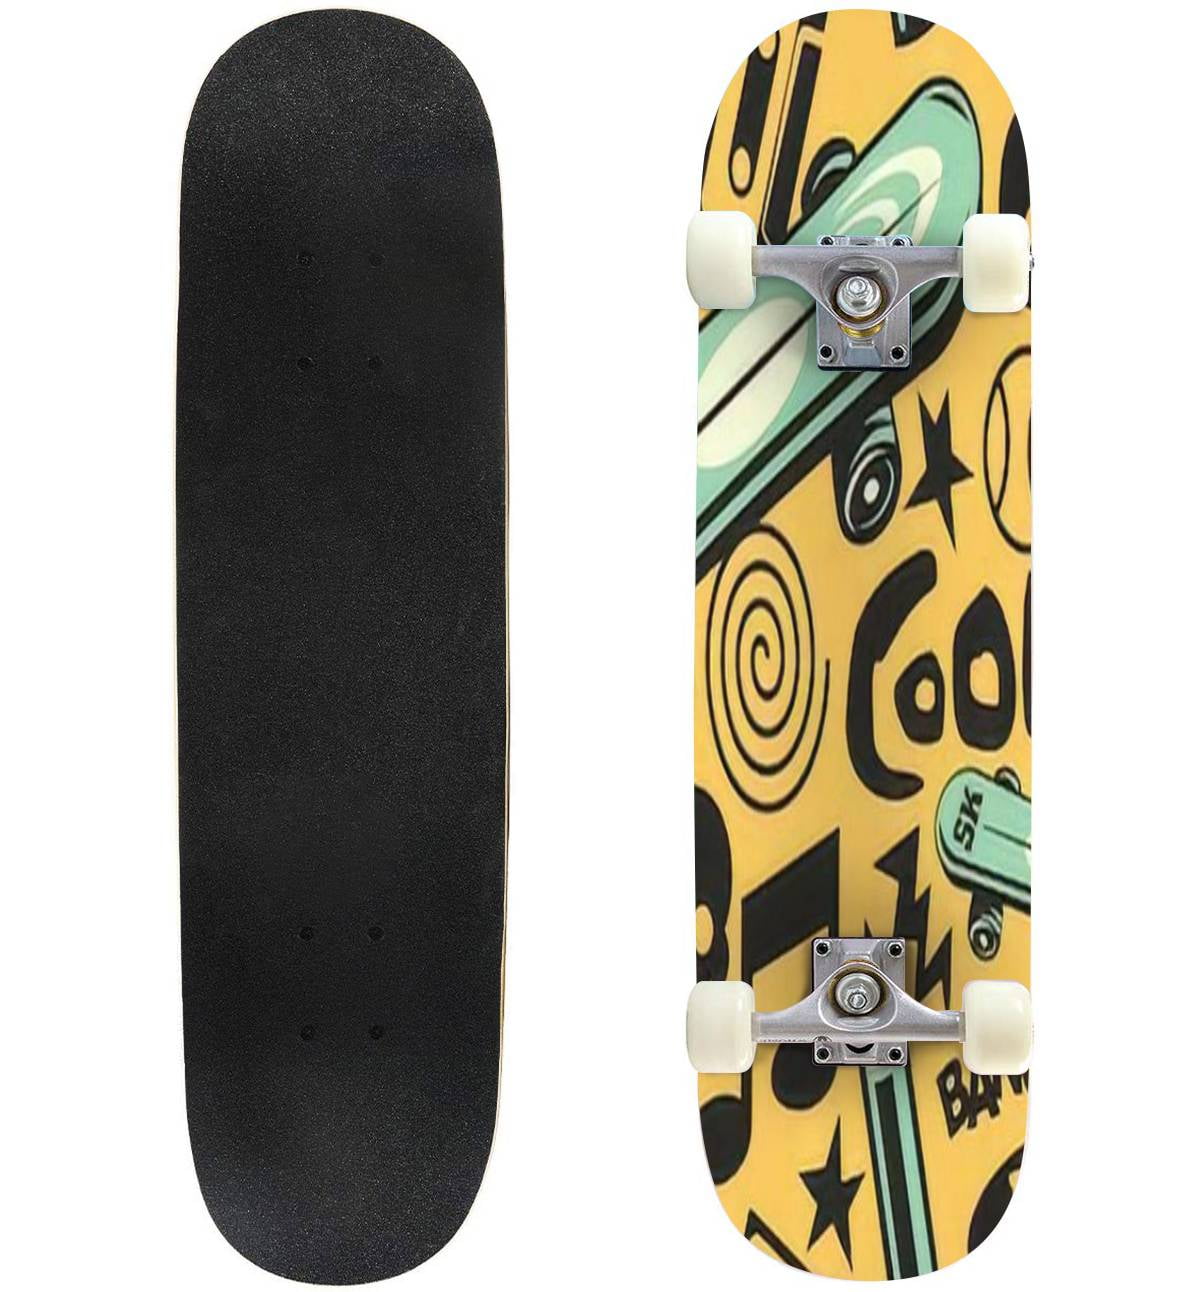 leef ermee prototype Schurend Seamless abstract pattern with skateboard and various cool kids stuff  Outdoor Skateboard Longboards 31"x8" Pro Complete Skate Board Cruiser -  Walmart.com